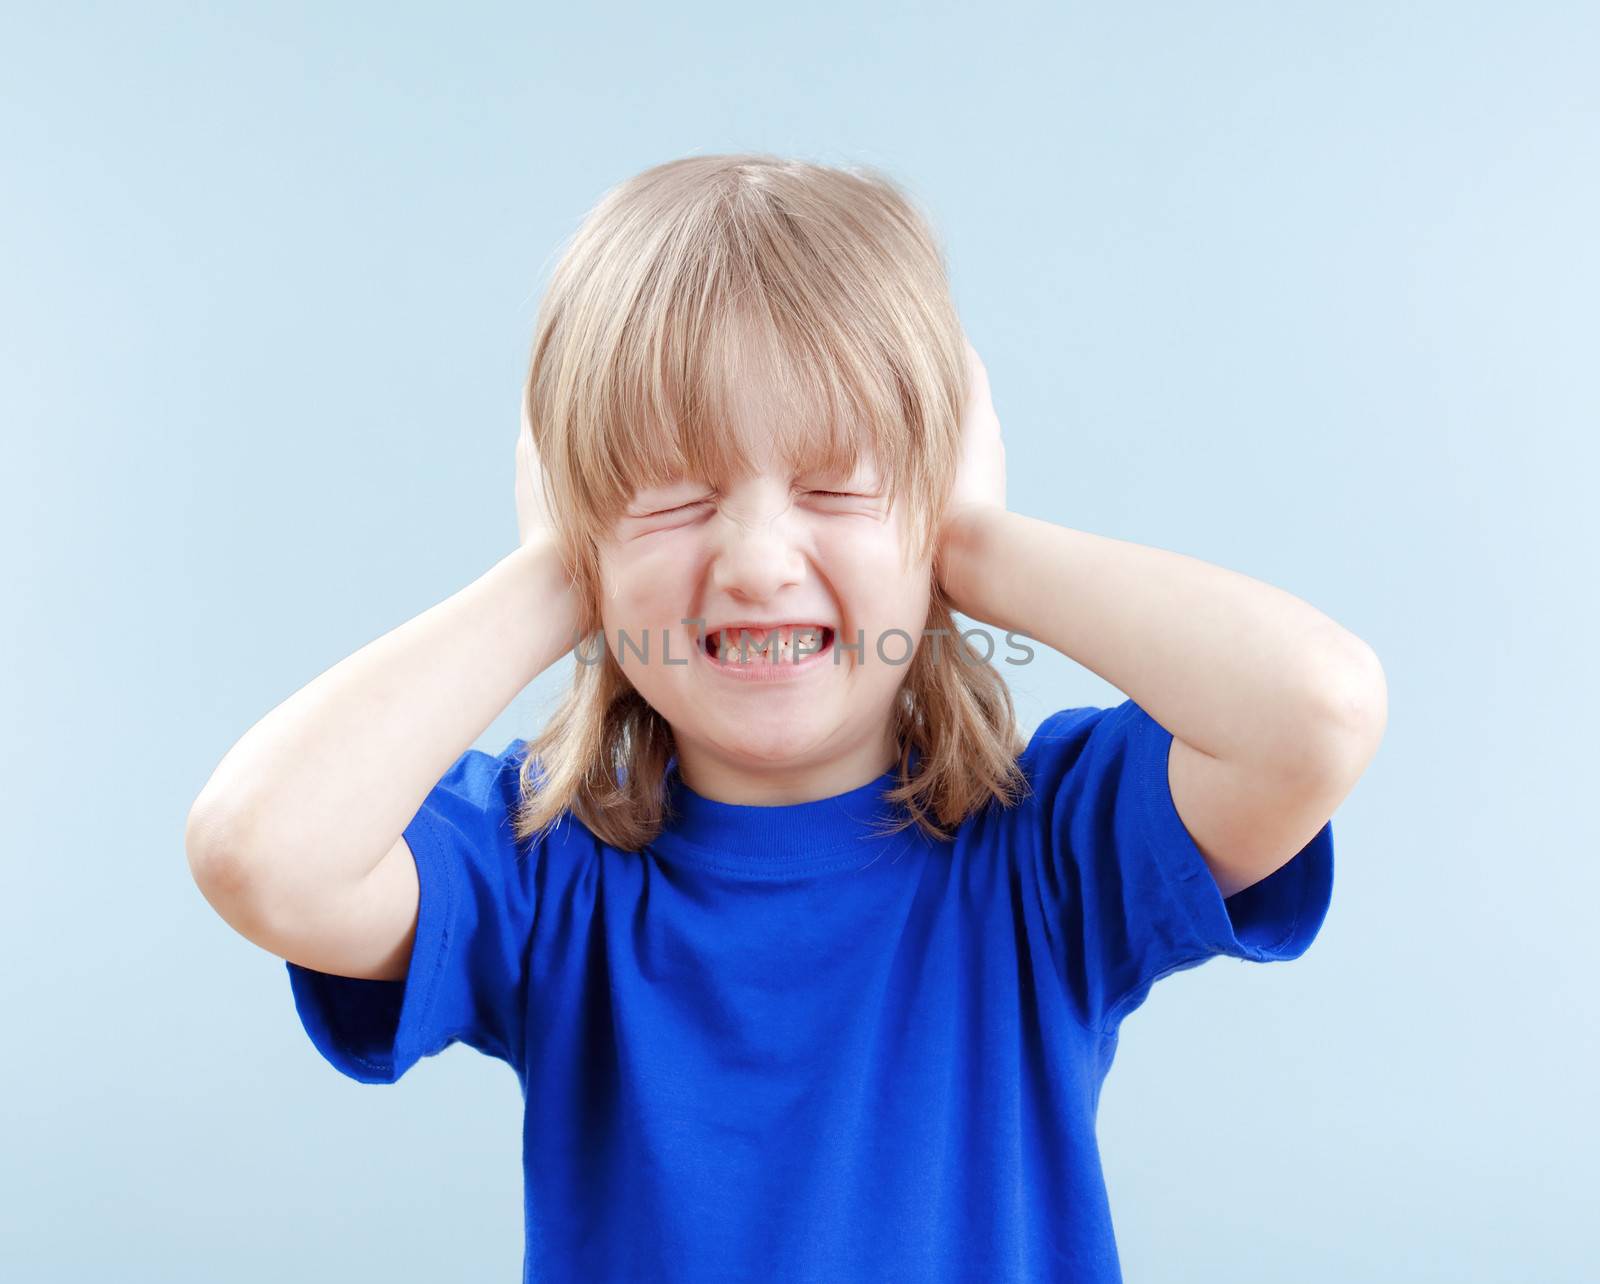 upset boy with long blond hair covering his ears as protection - isolated on blue